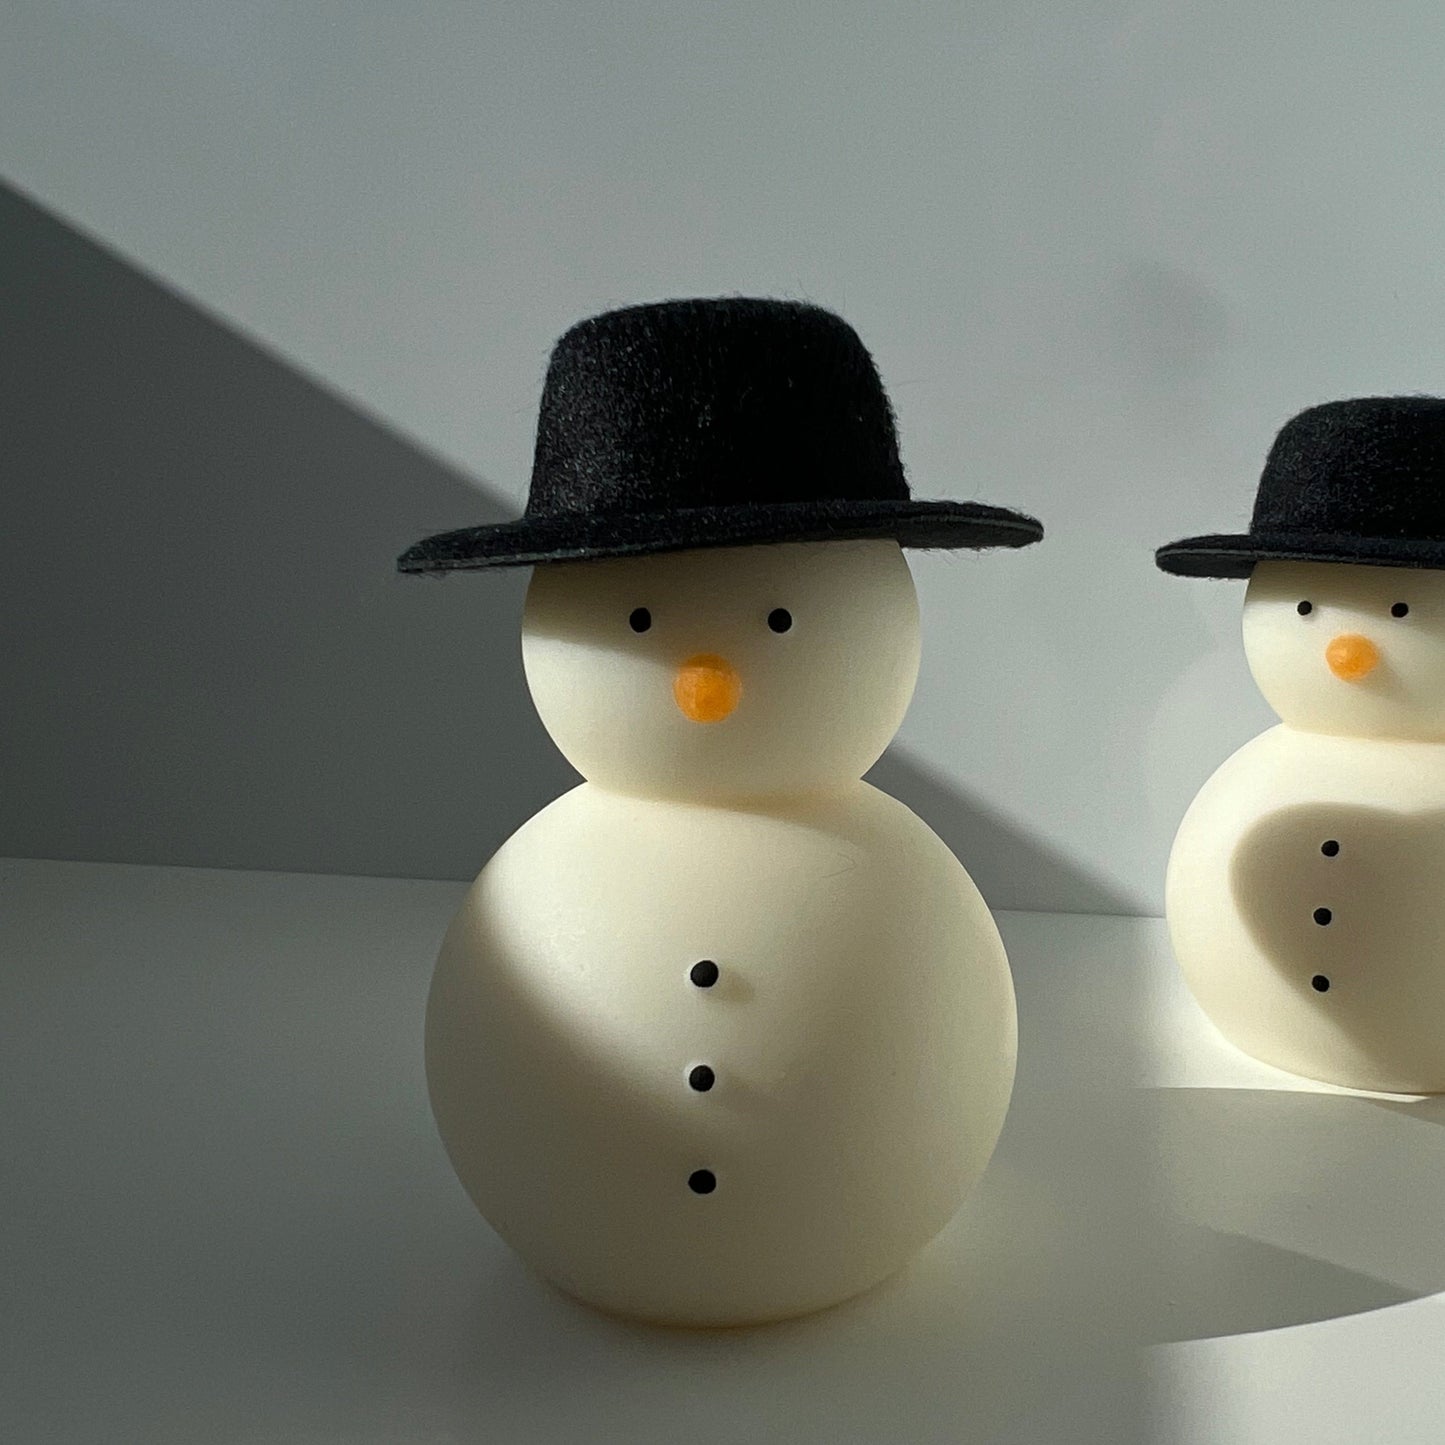 Snowman with a hat